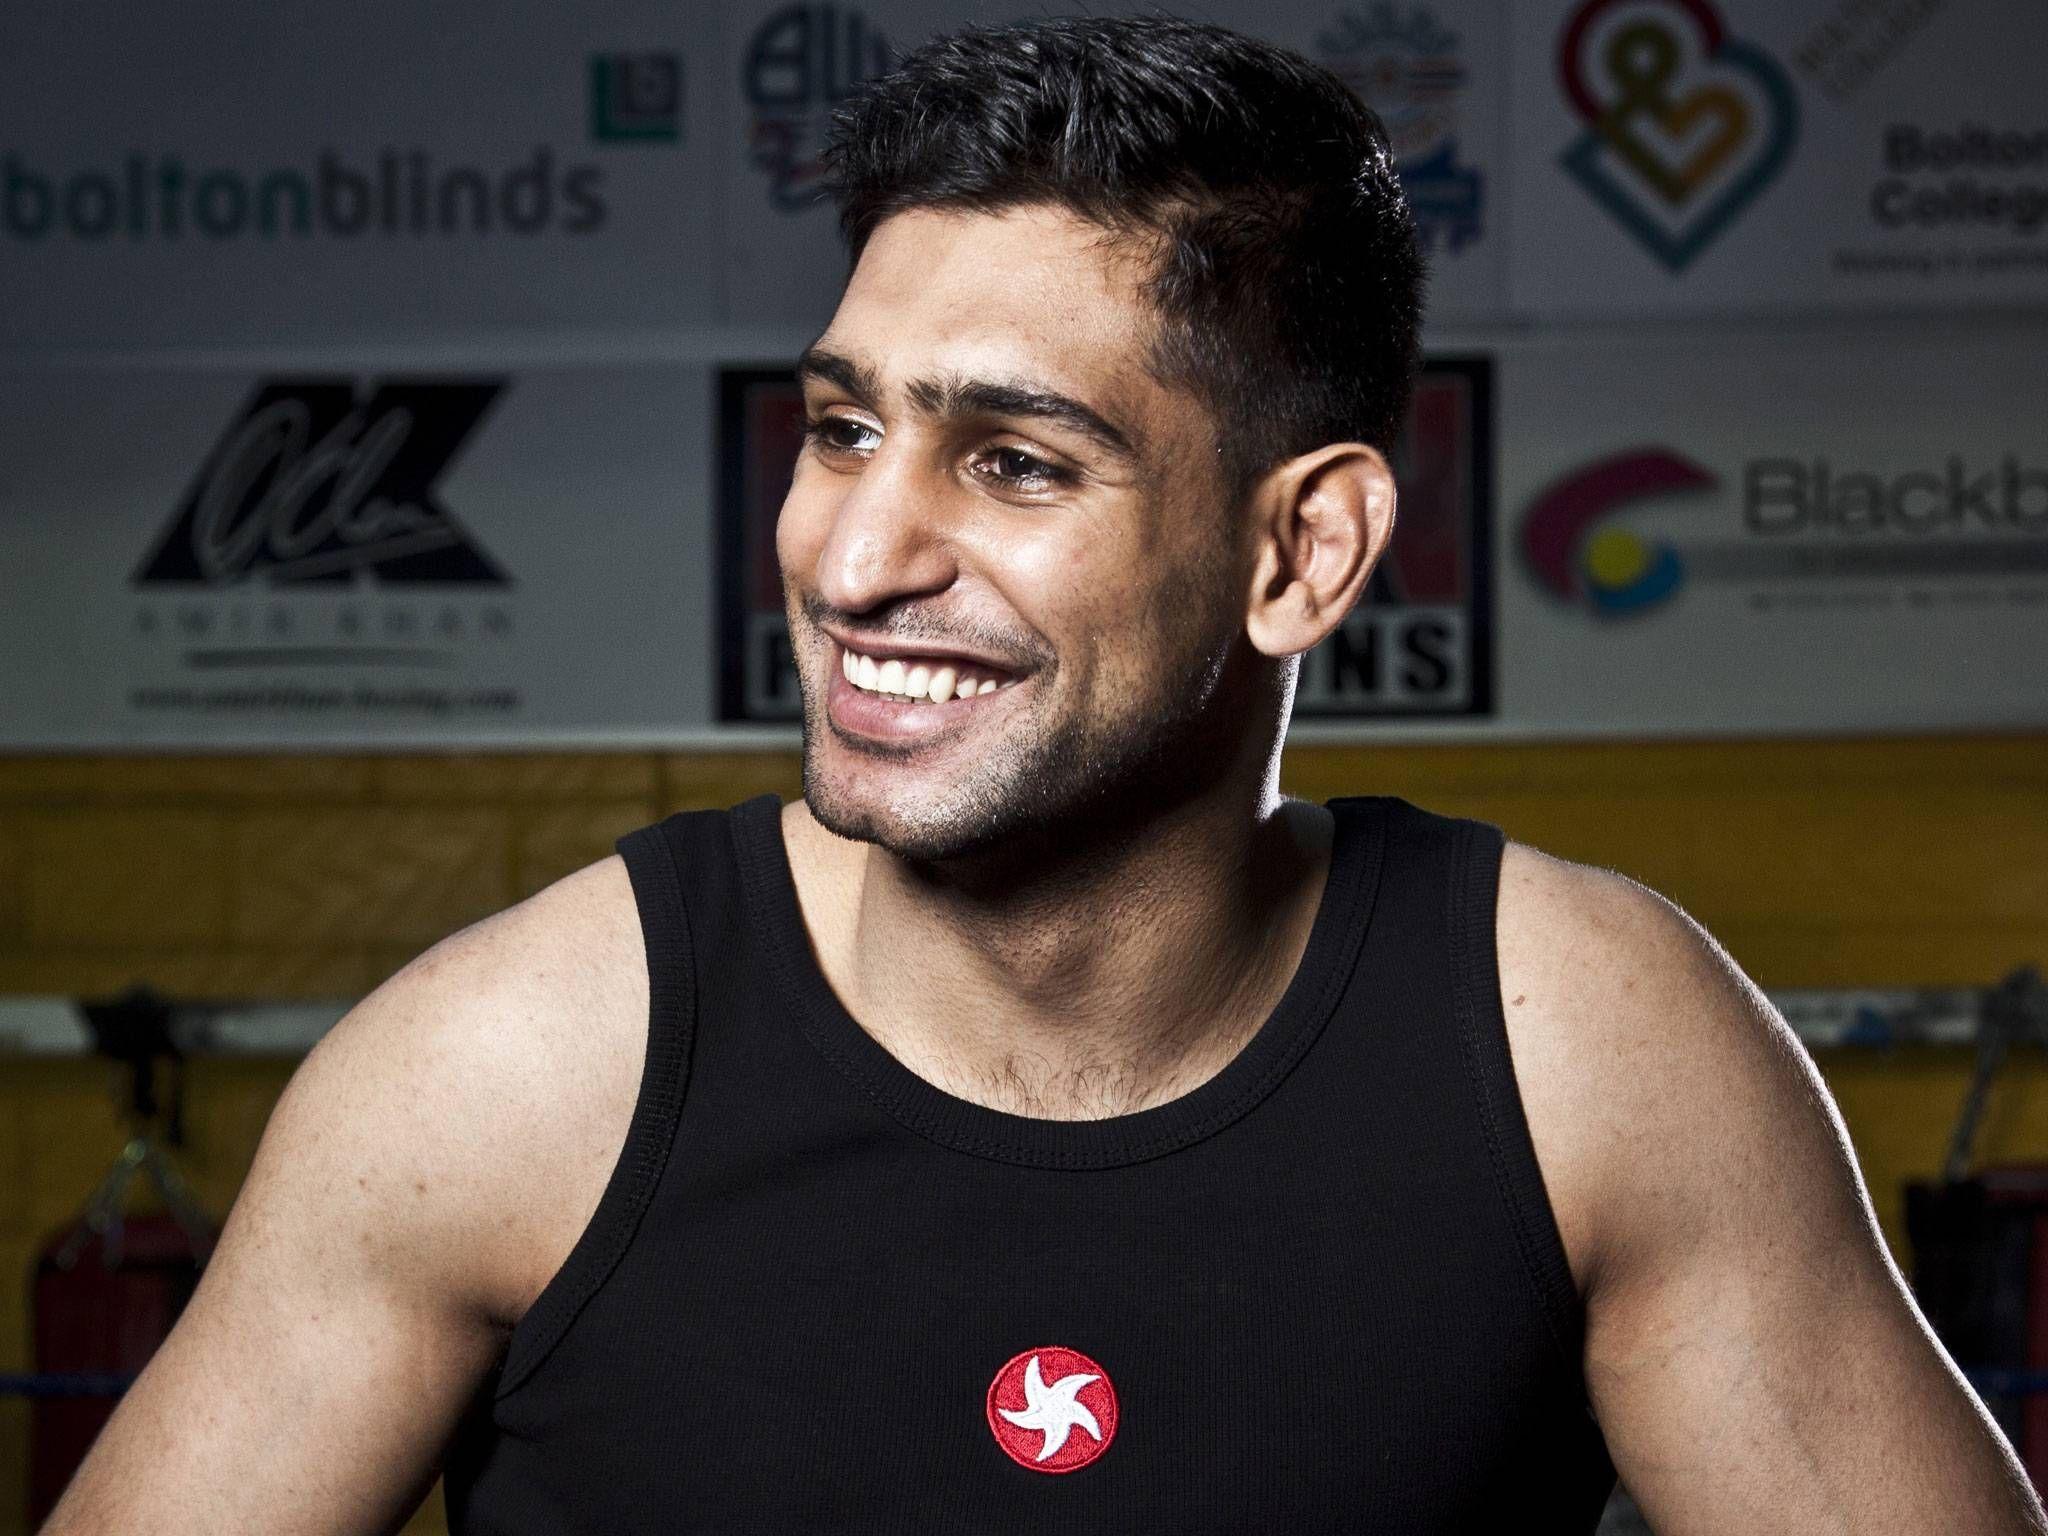 Download The Latest Amir Khan Boxer Wallpaper And Picture From